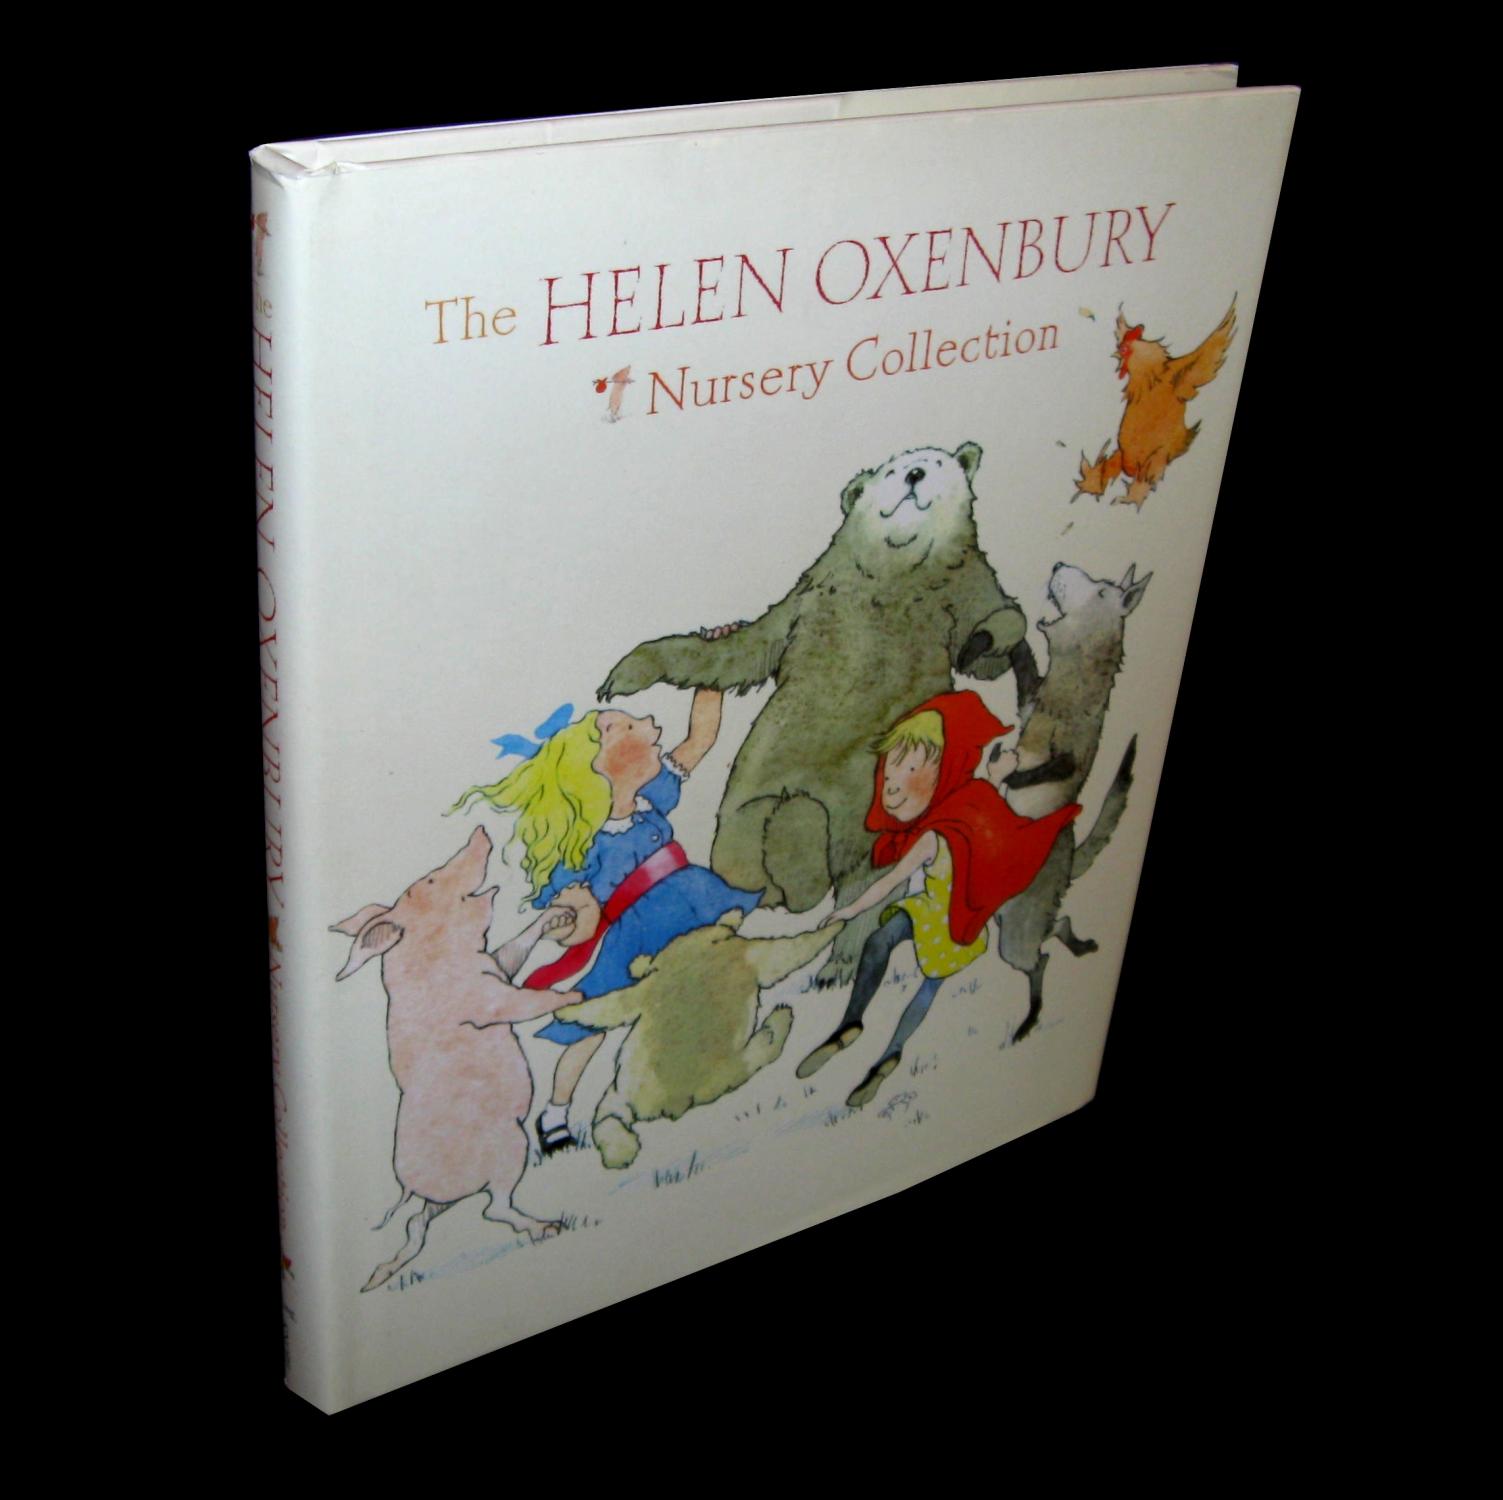 The Helen Oxenbury Nursery Collection by Oxenbury, Helen (illustrator):  Near Fine Hardcover (2004) First American Edition. | Homeward Bound Books